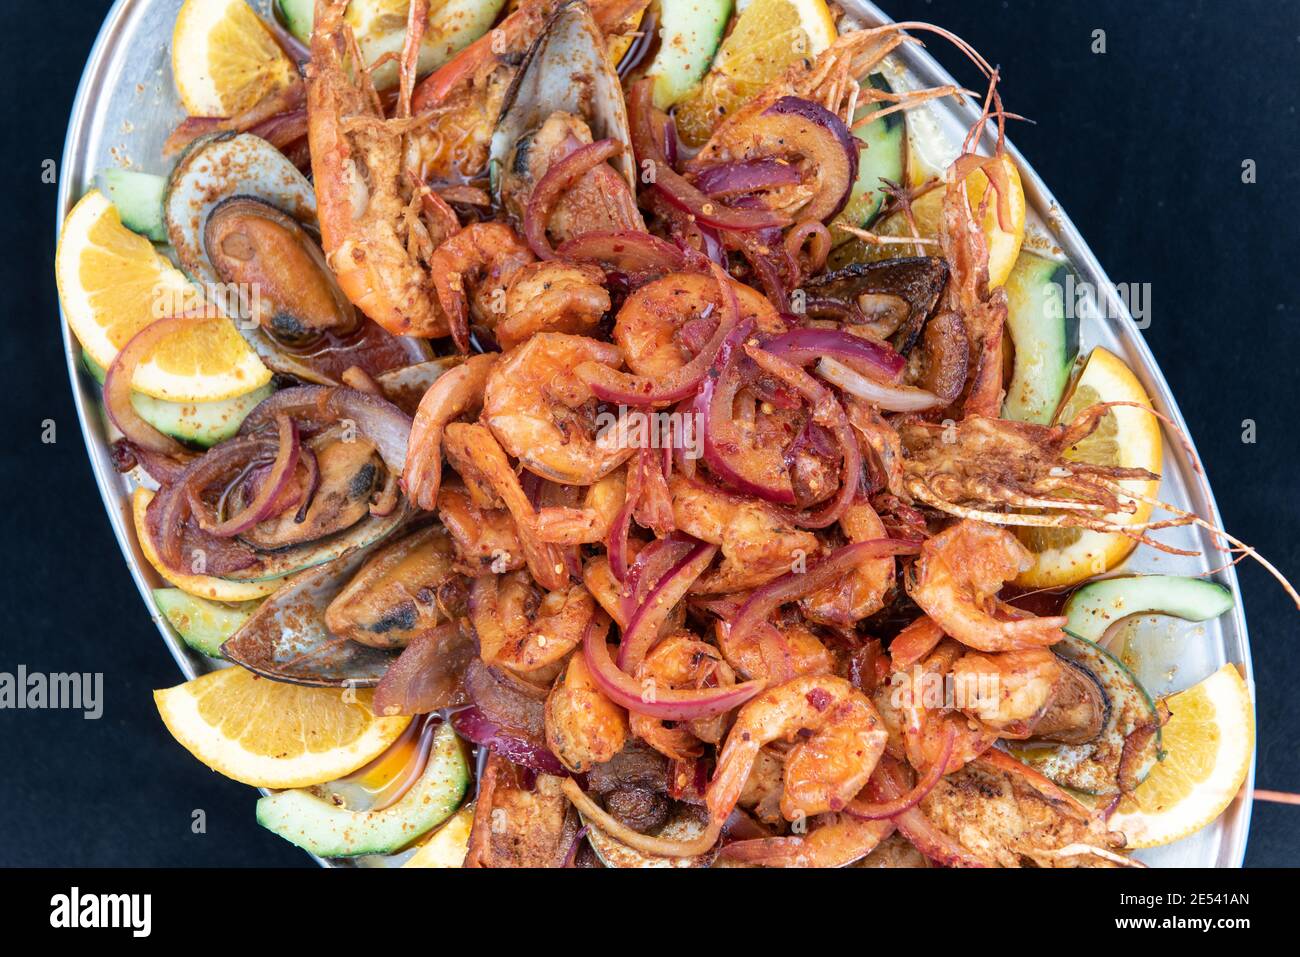 Overhead view of large pile of spicy shrimp plate served over roasted vegetables and garnished with orange slices. Stock Photo